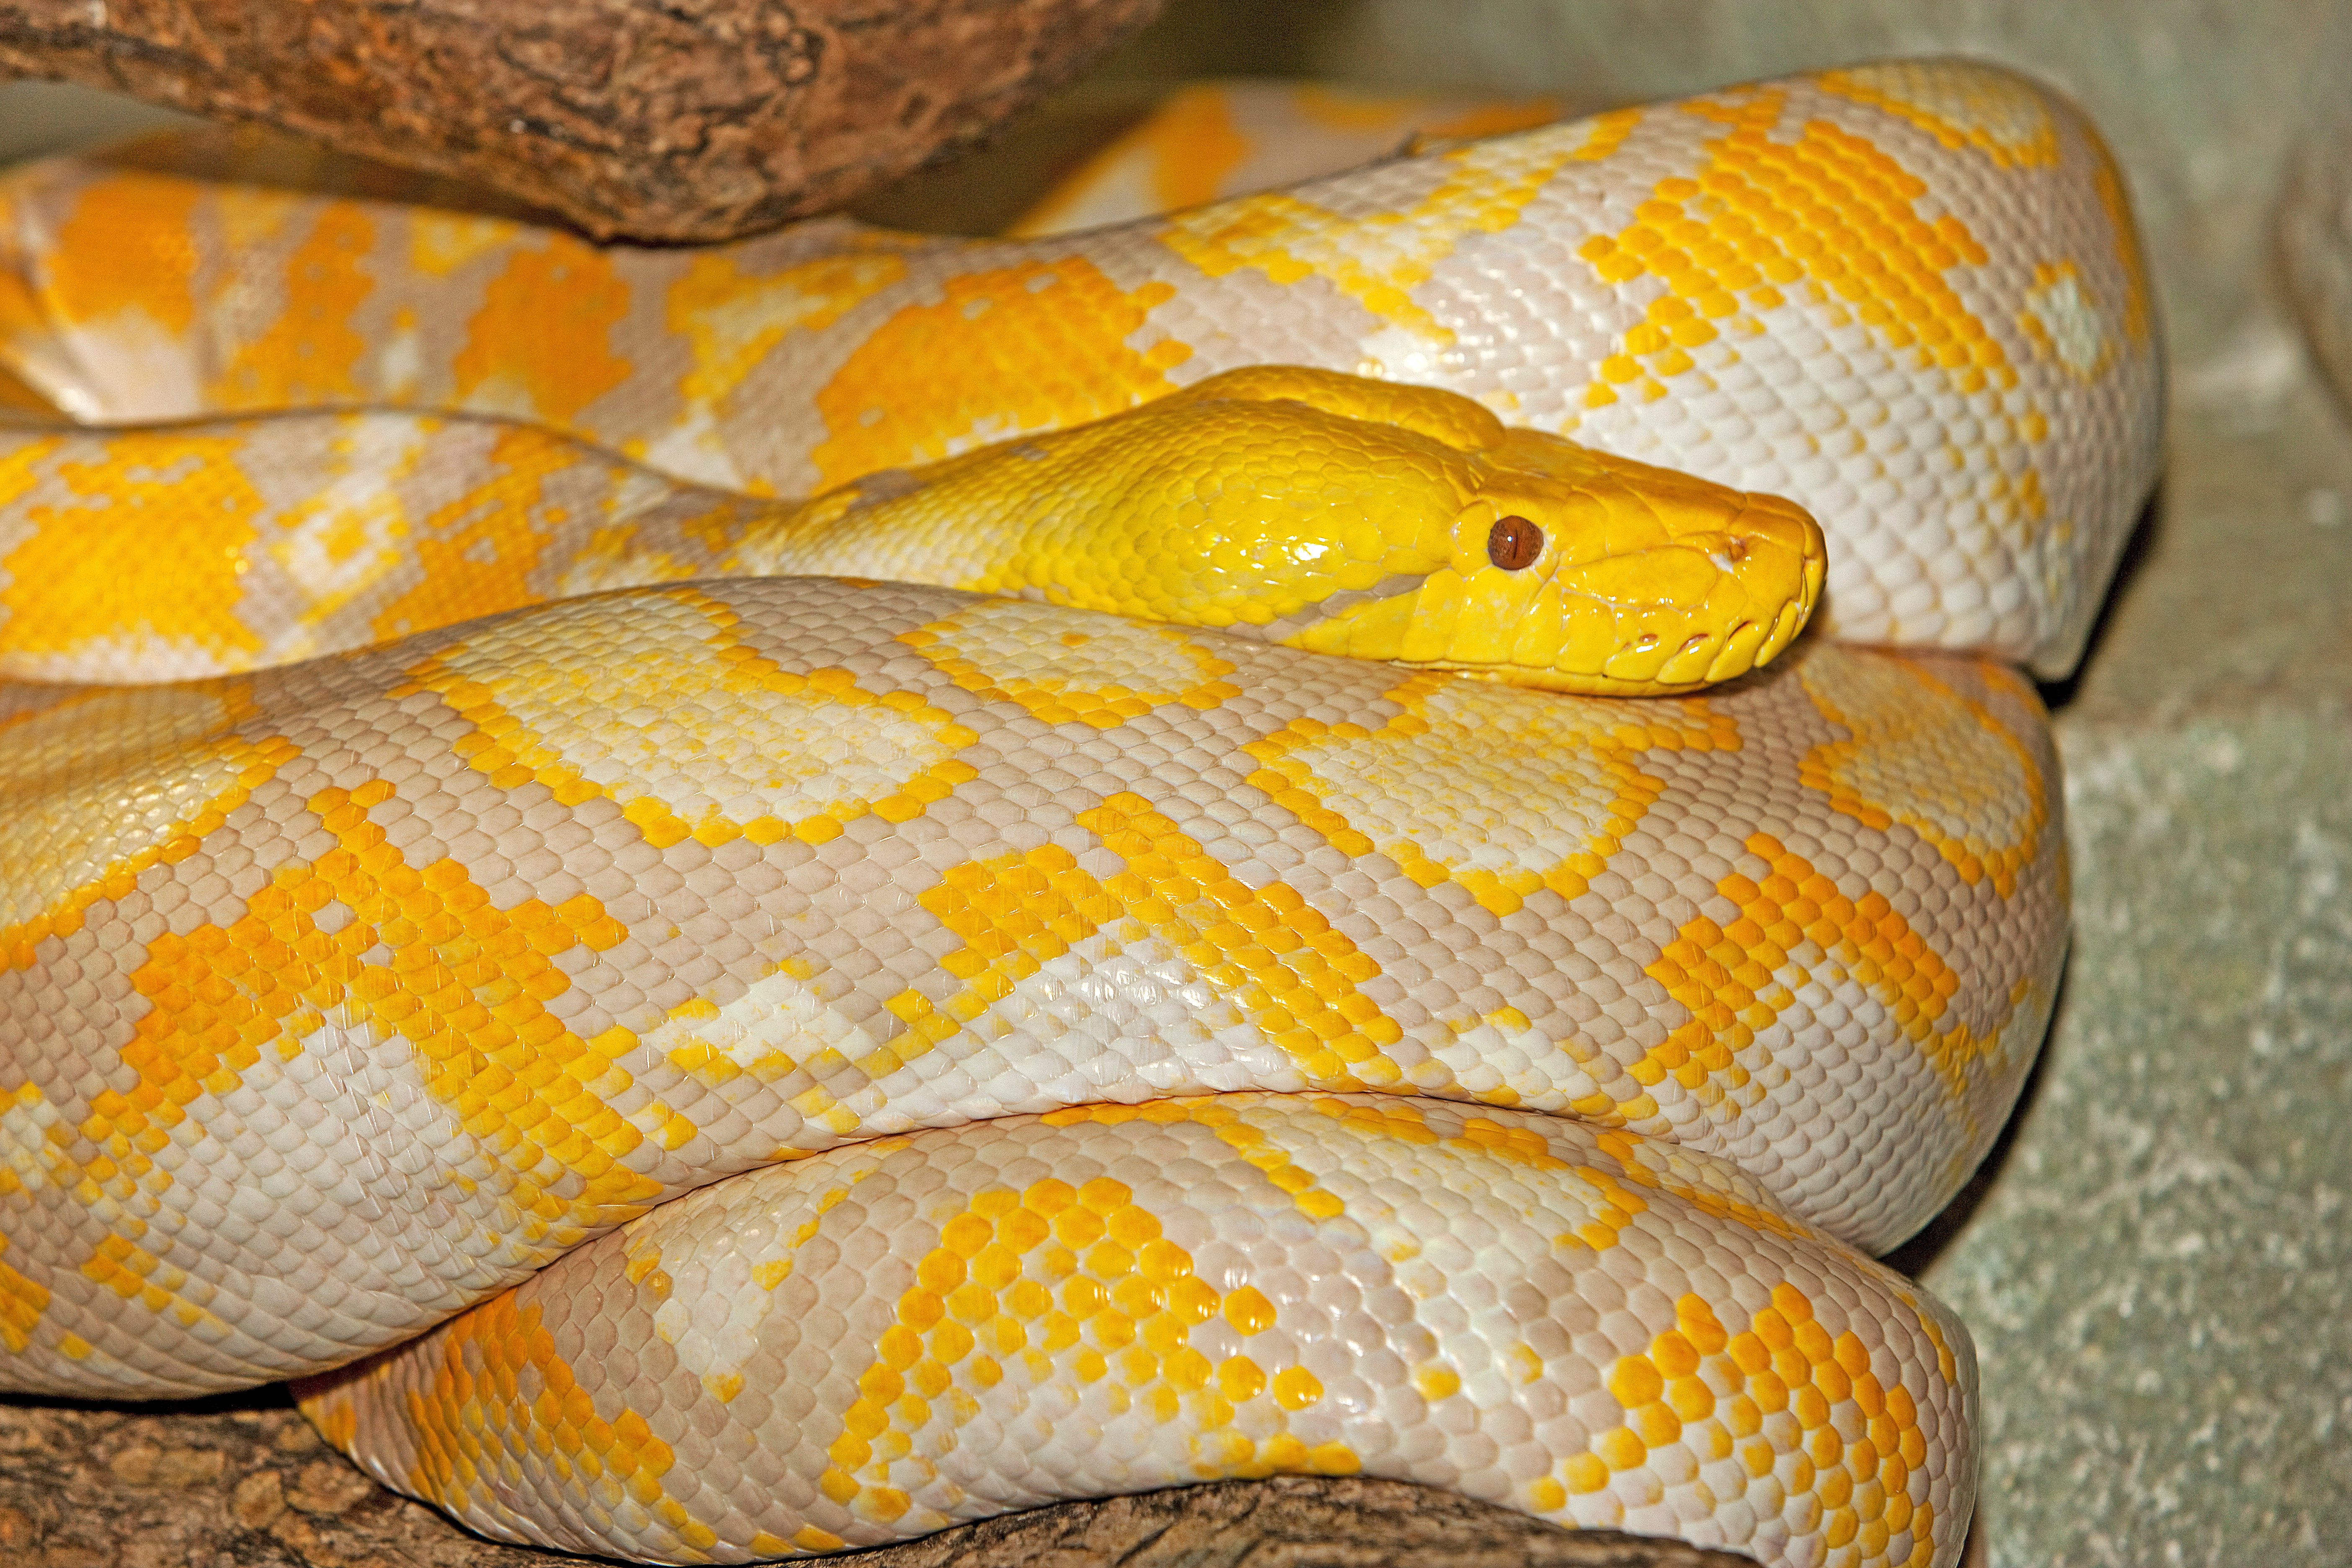 An albino reticulated python similar to the one who bit Walter Erhard | Photo: Shutterstock